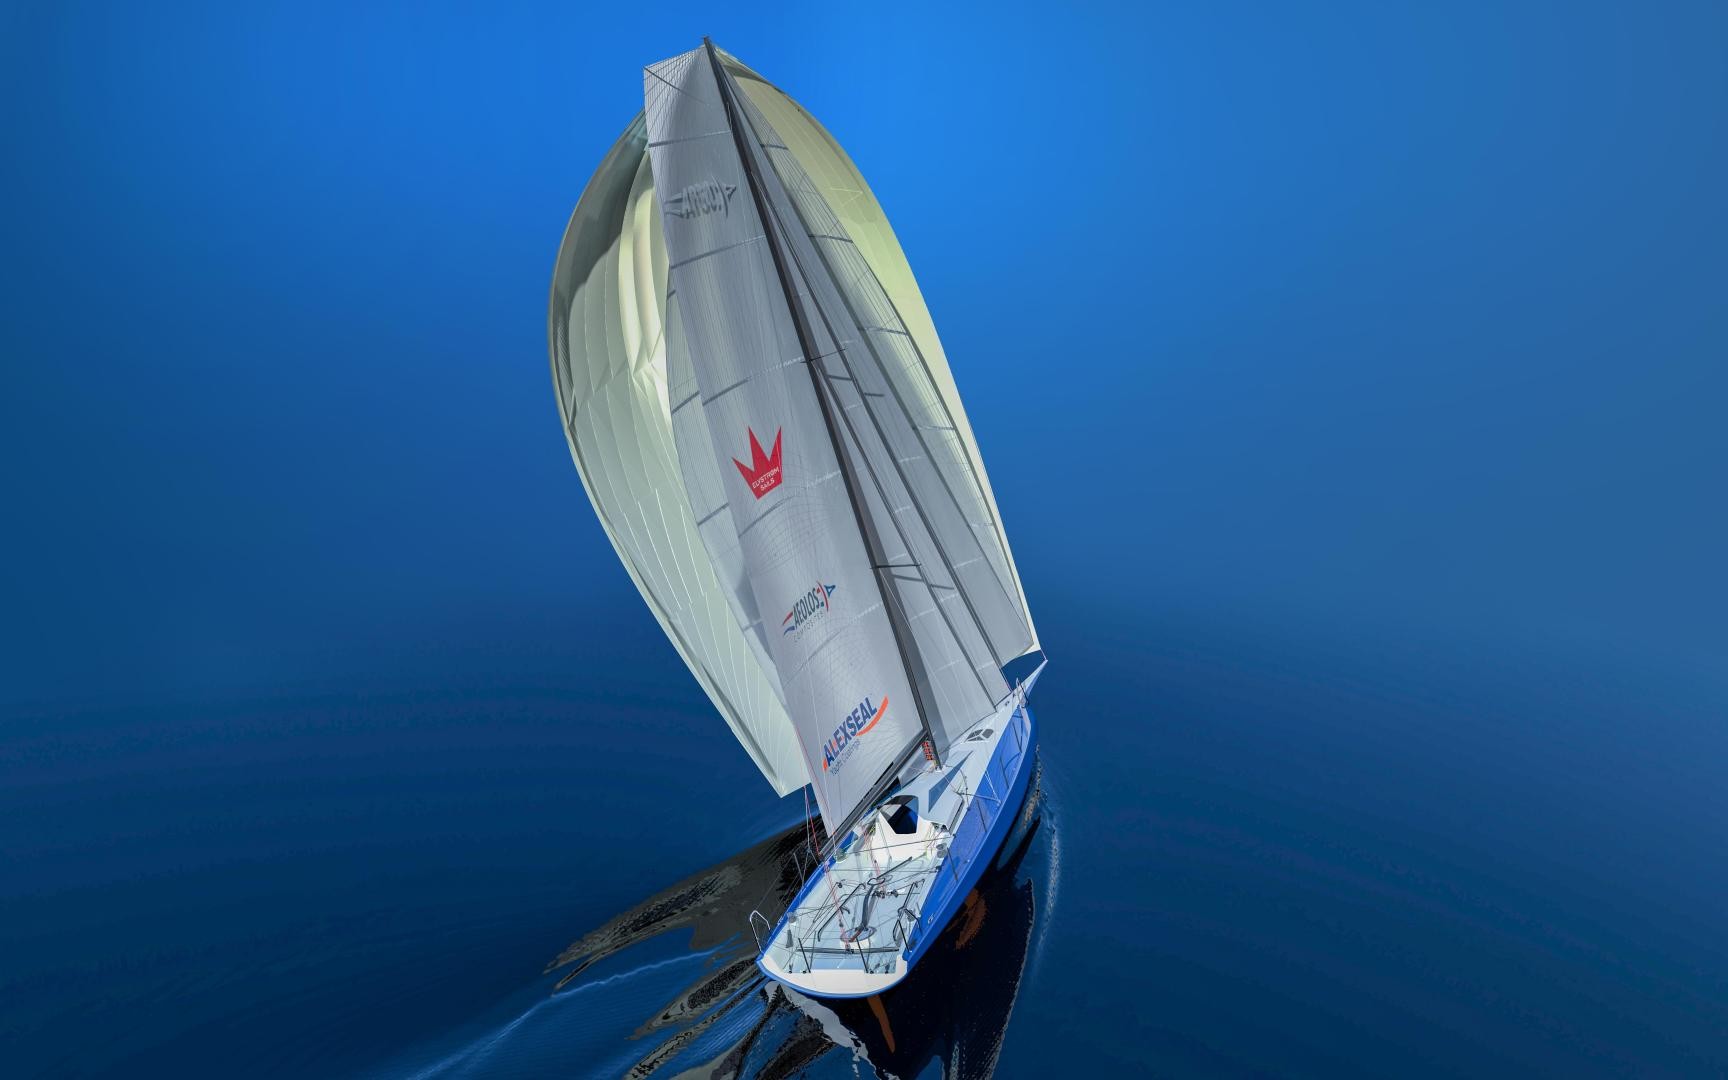 The Aeolos P30 is a radical design for an ultra-light doublehanded offshore racer with some unusual and interesting features. Itʼs notably slim in the beam with a fully balanced waterplane from 0-30° of heel; it also weighs about half as much as some of the other current IRC offerings at this size